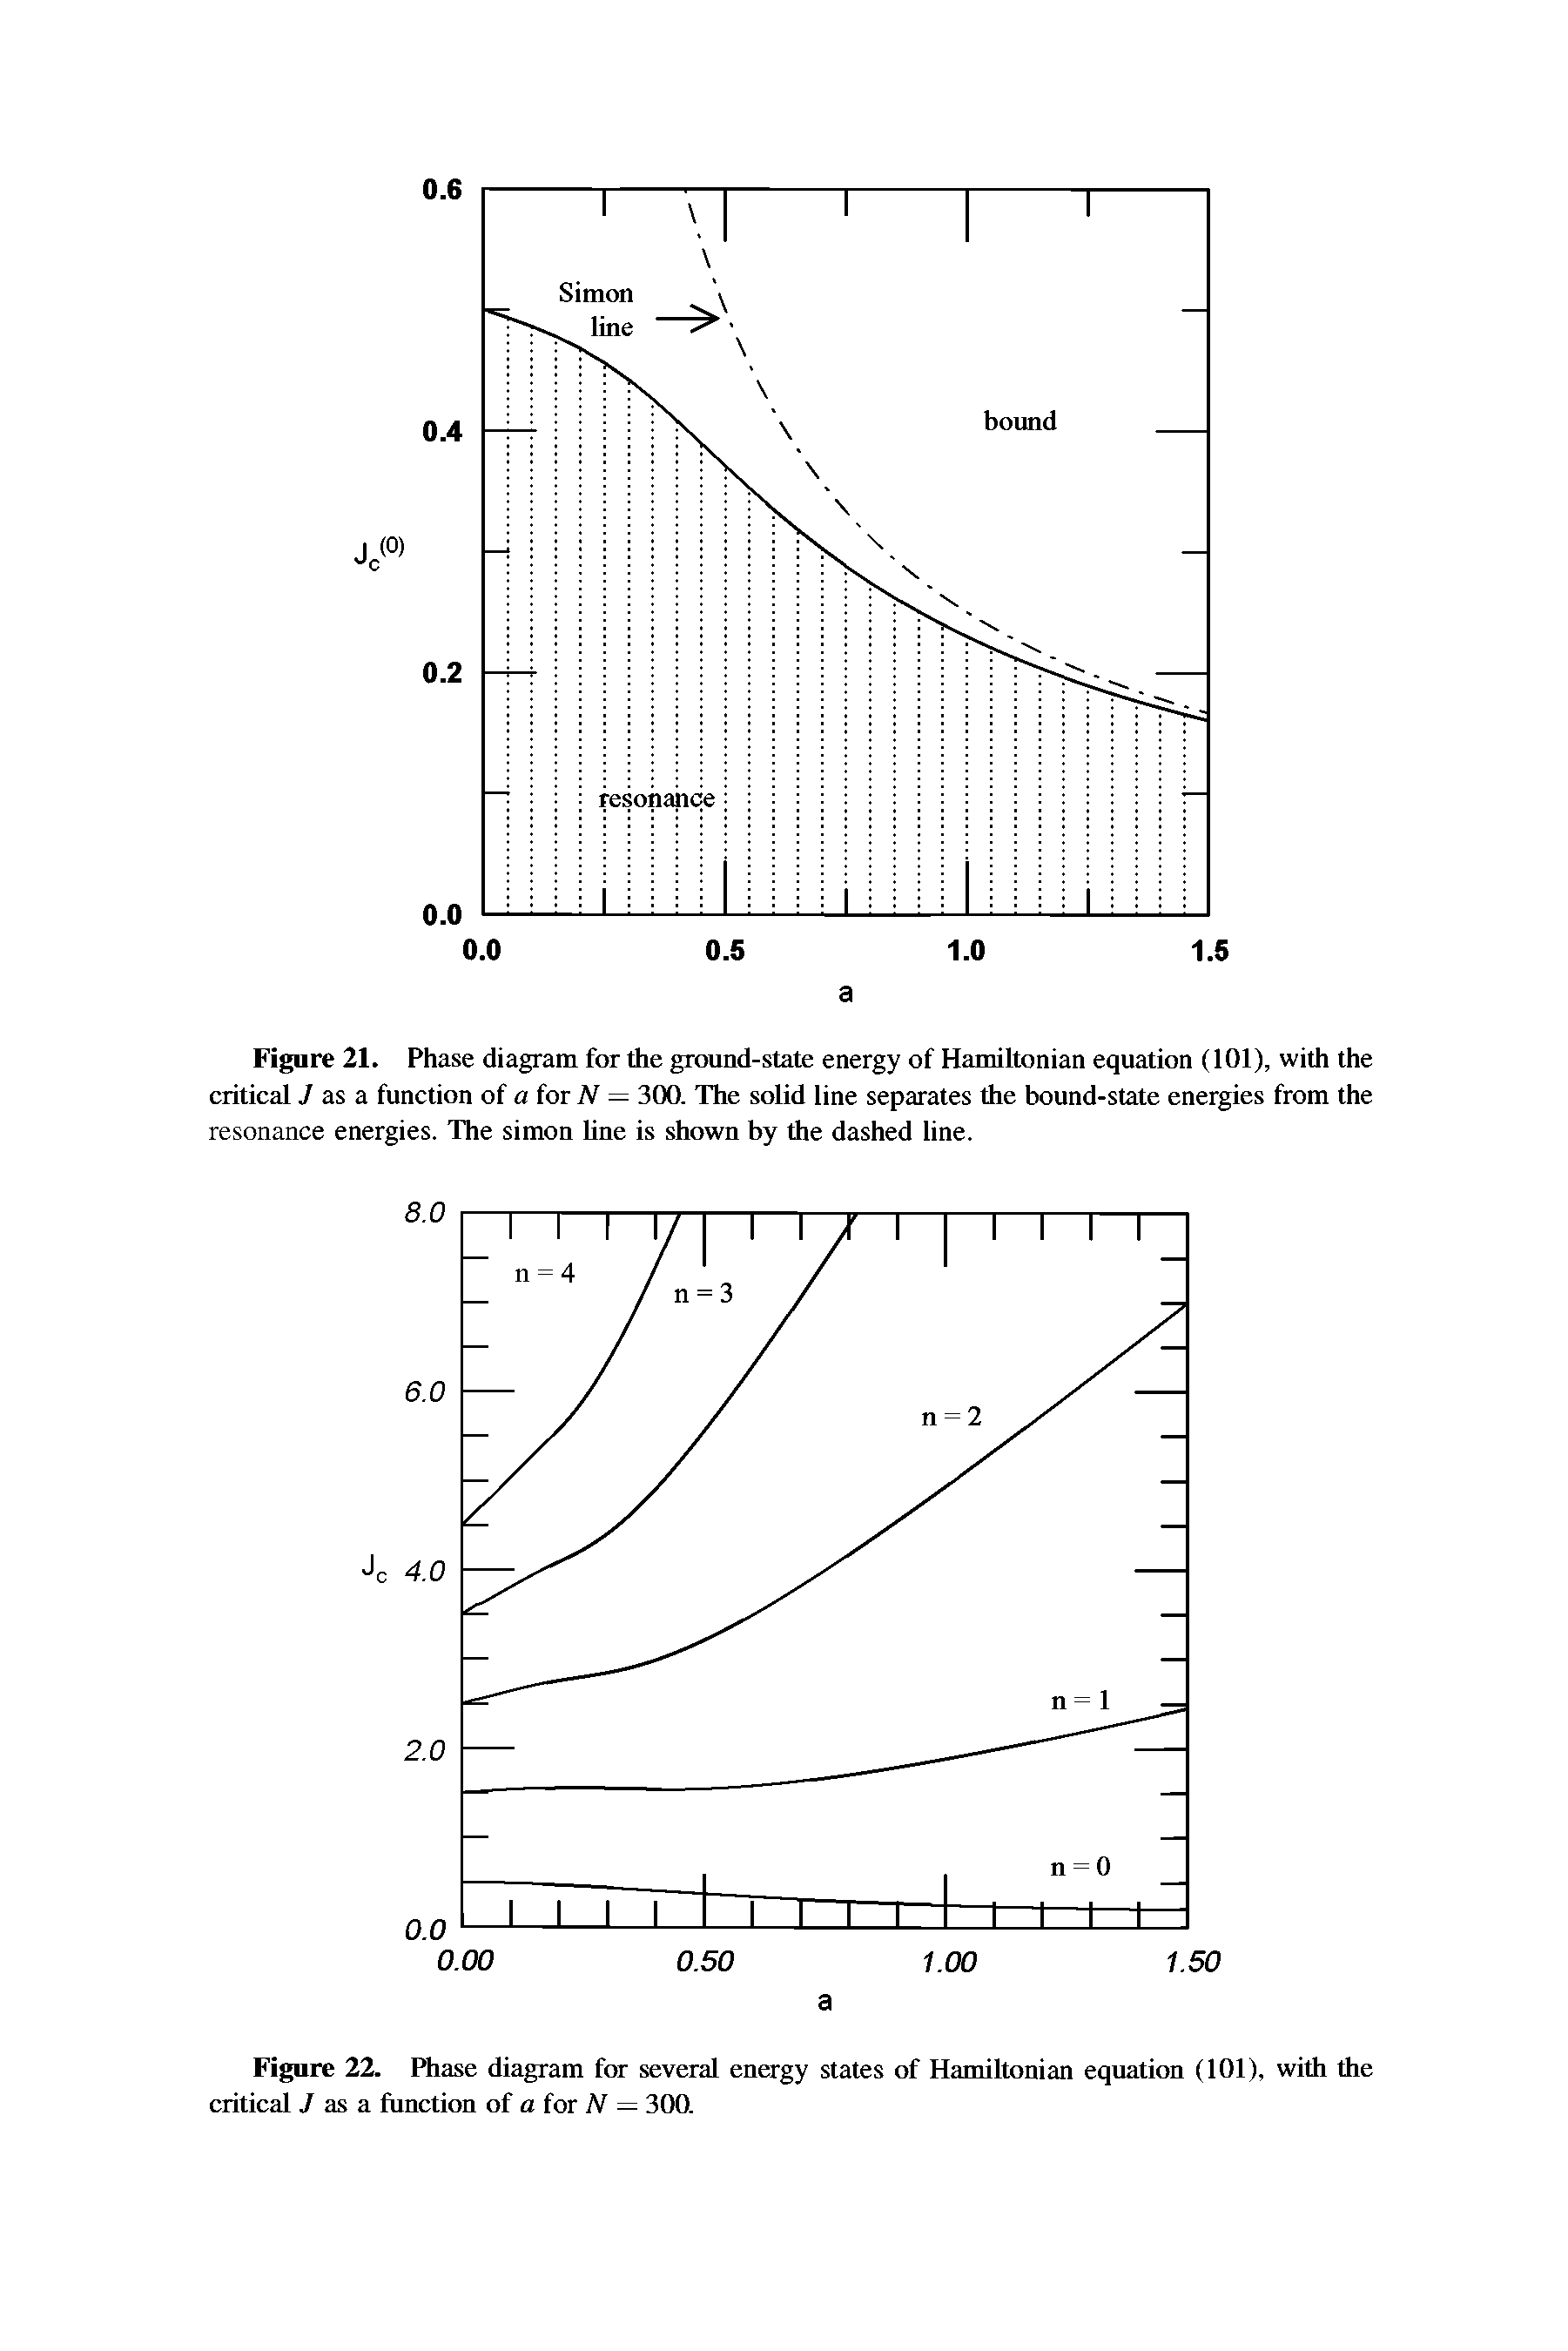 Figure 21. Phase diagram for the ground-state energy of Hamiltonian equation (101), with the critical J as a function of a for N — 300. The solid line separates the bound-state energies from the resonance energies. The simon line is shown by the dashed line.